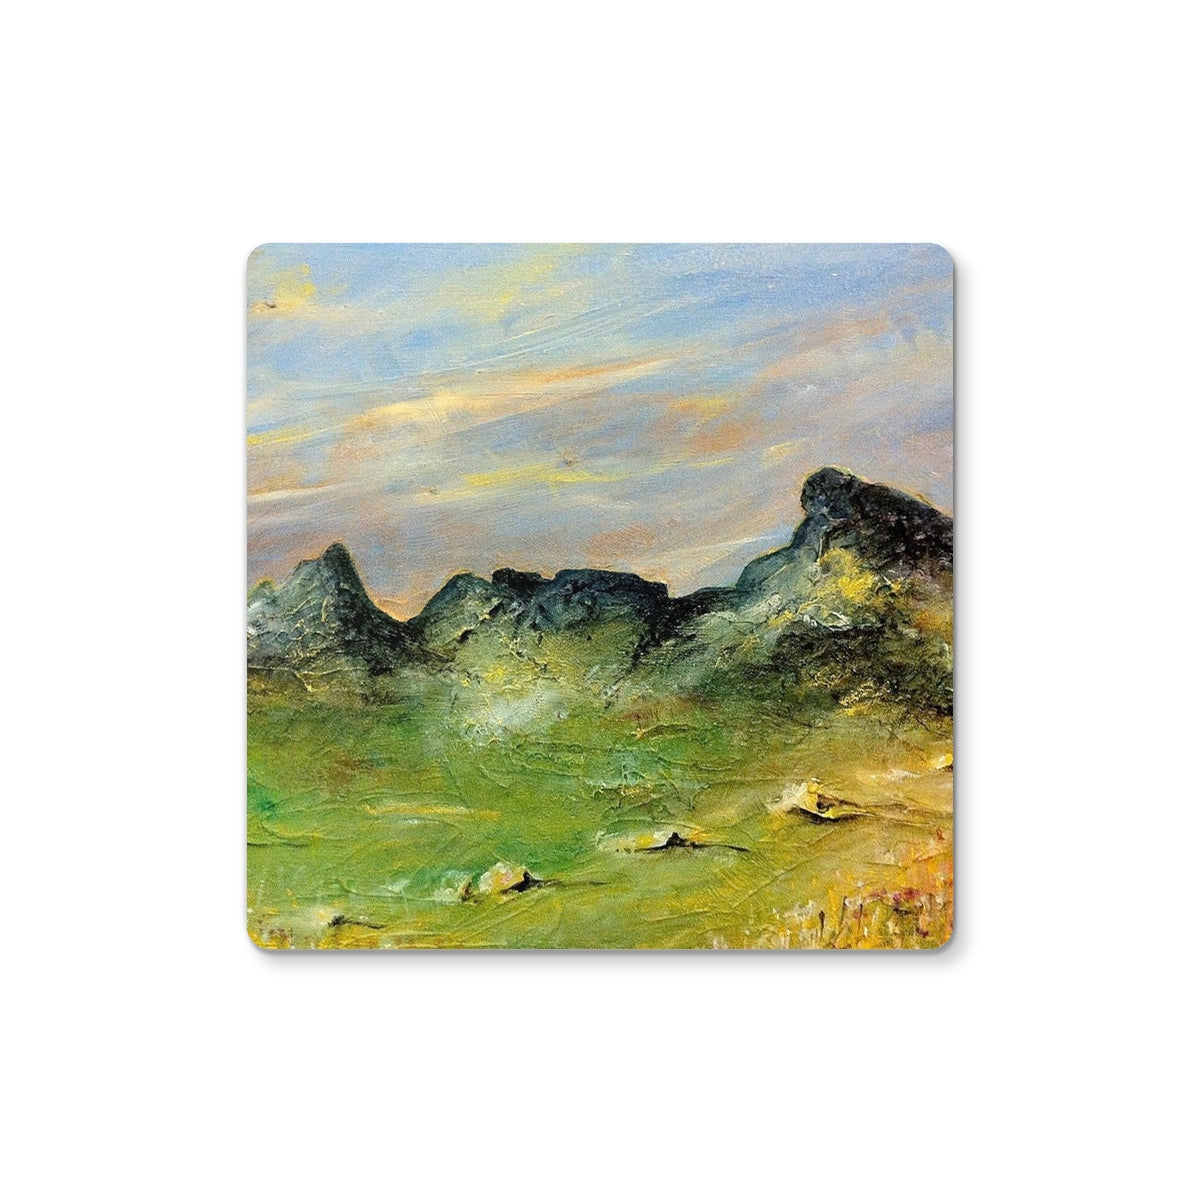 The Cobbler Art Gifts Coaster-Coasters-Scottish Lochs & Mountains Art Gallery-Single Coaster-Paintings, Prints, Homeware, Art Gifts From Scotland By Scottish Artist Kevin Hunter